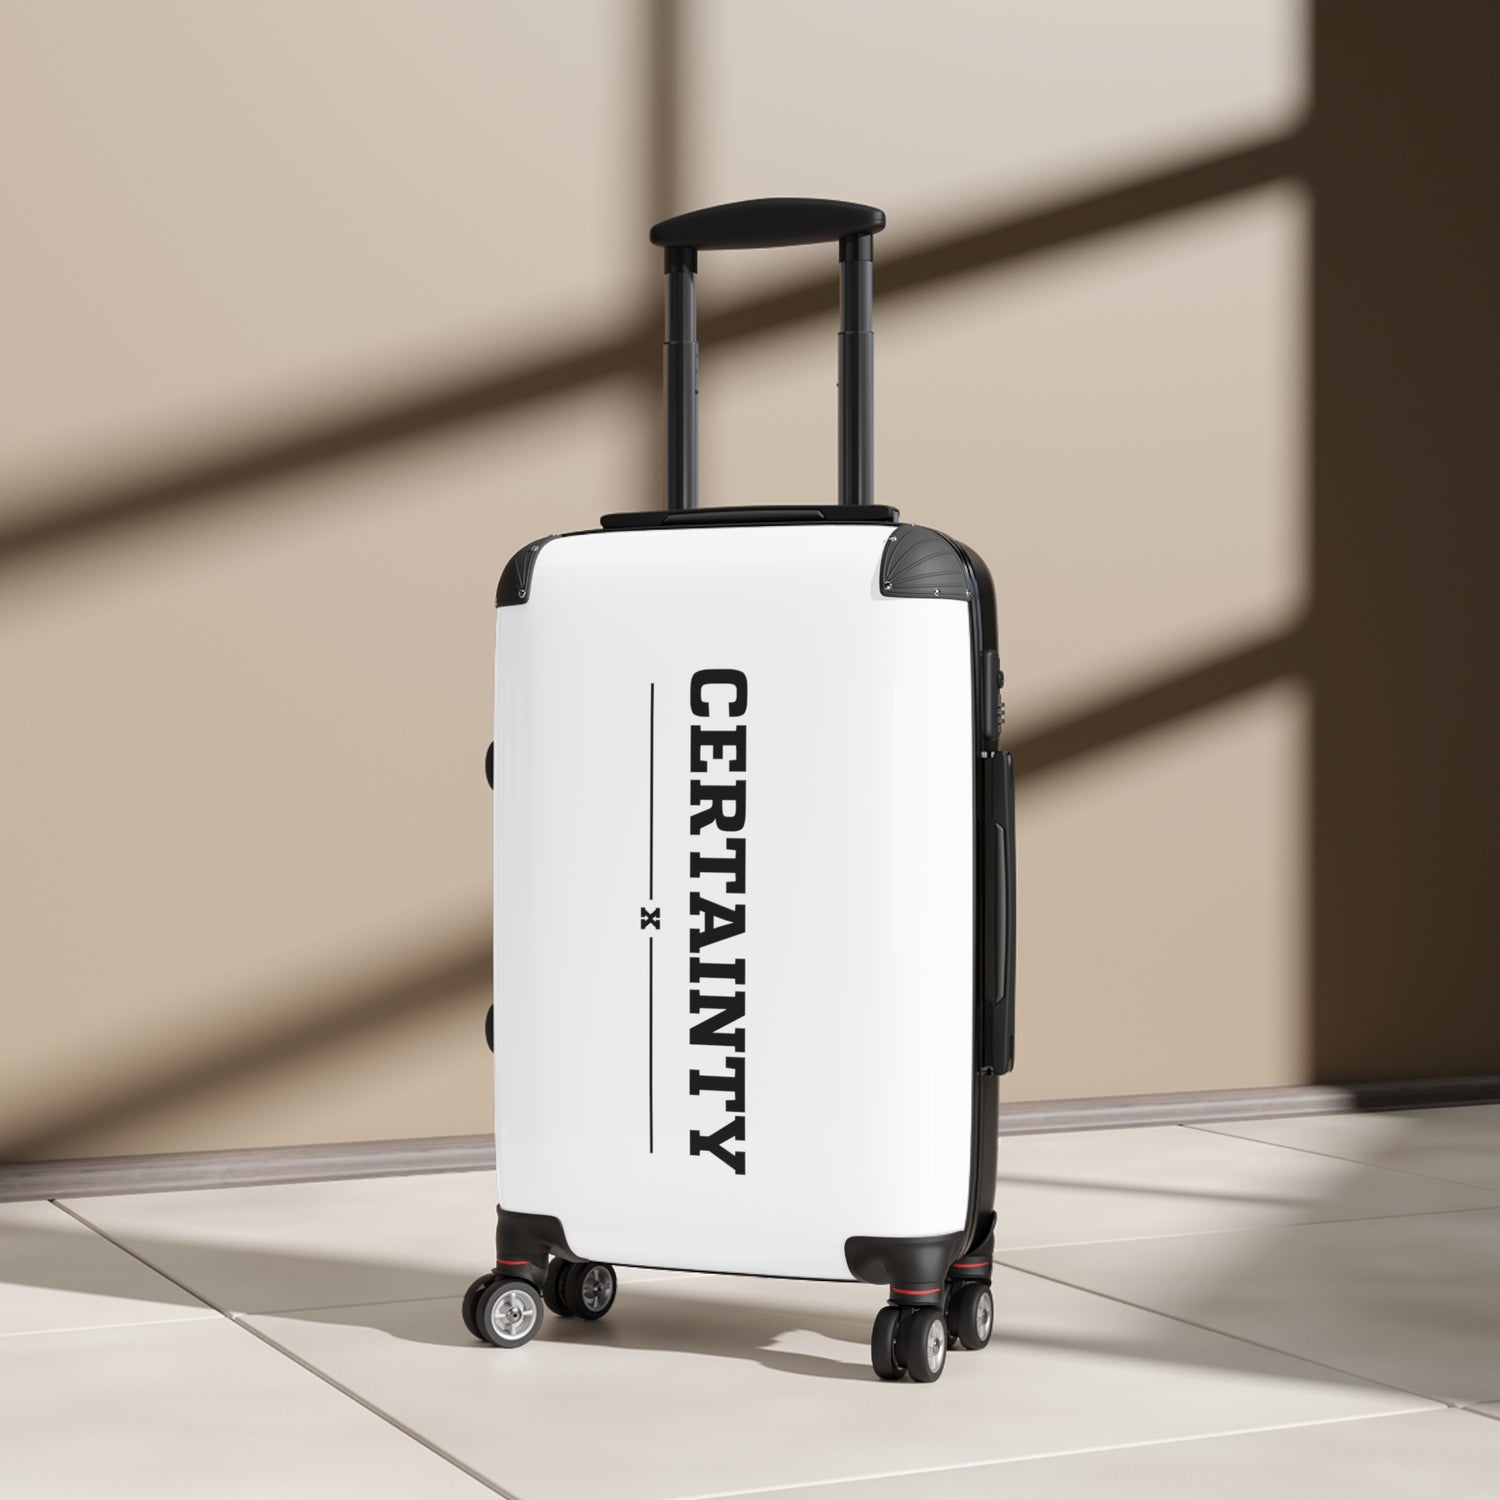 Certainty Suitcase